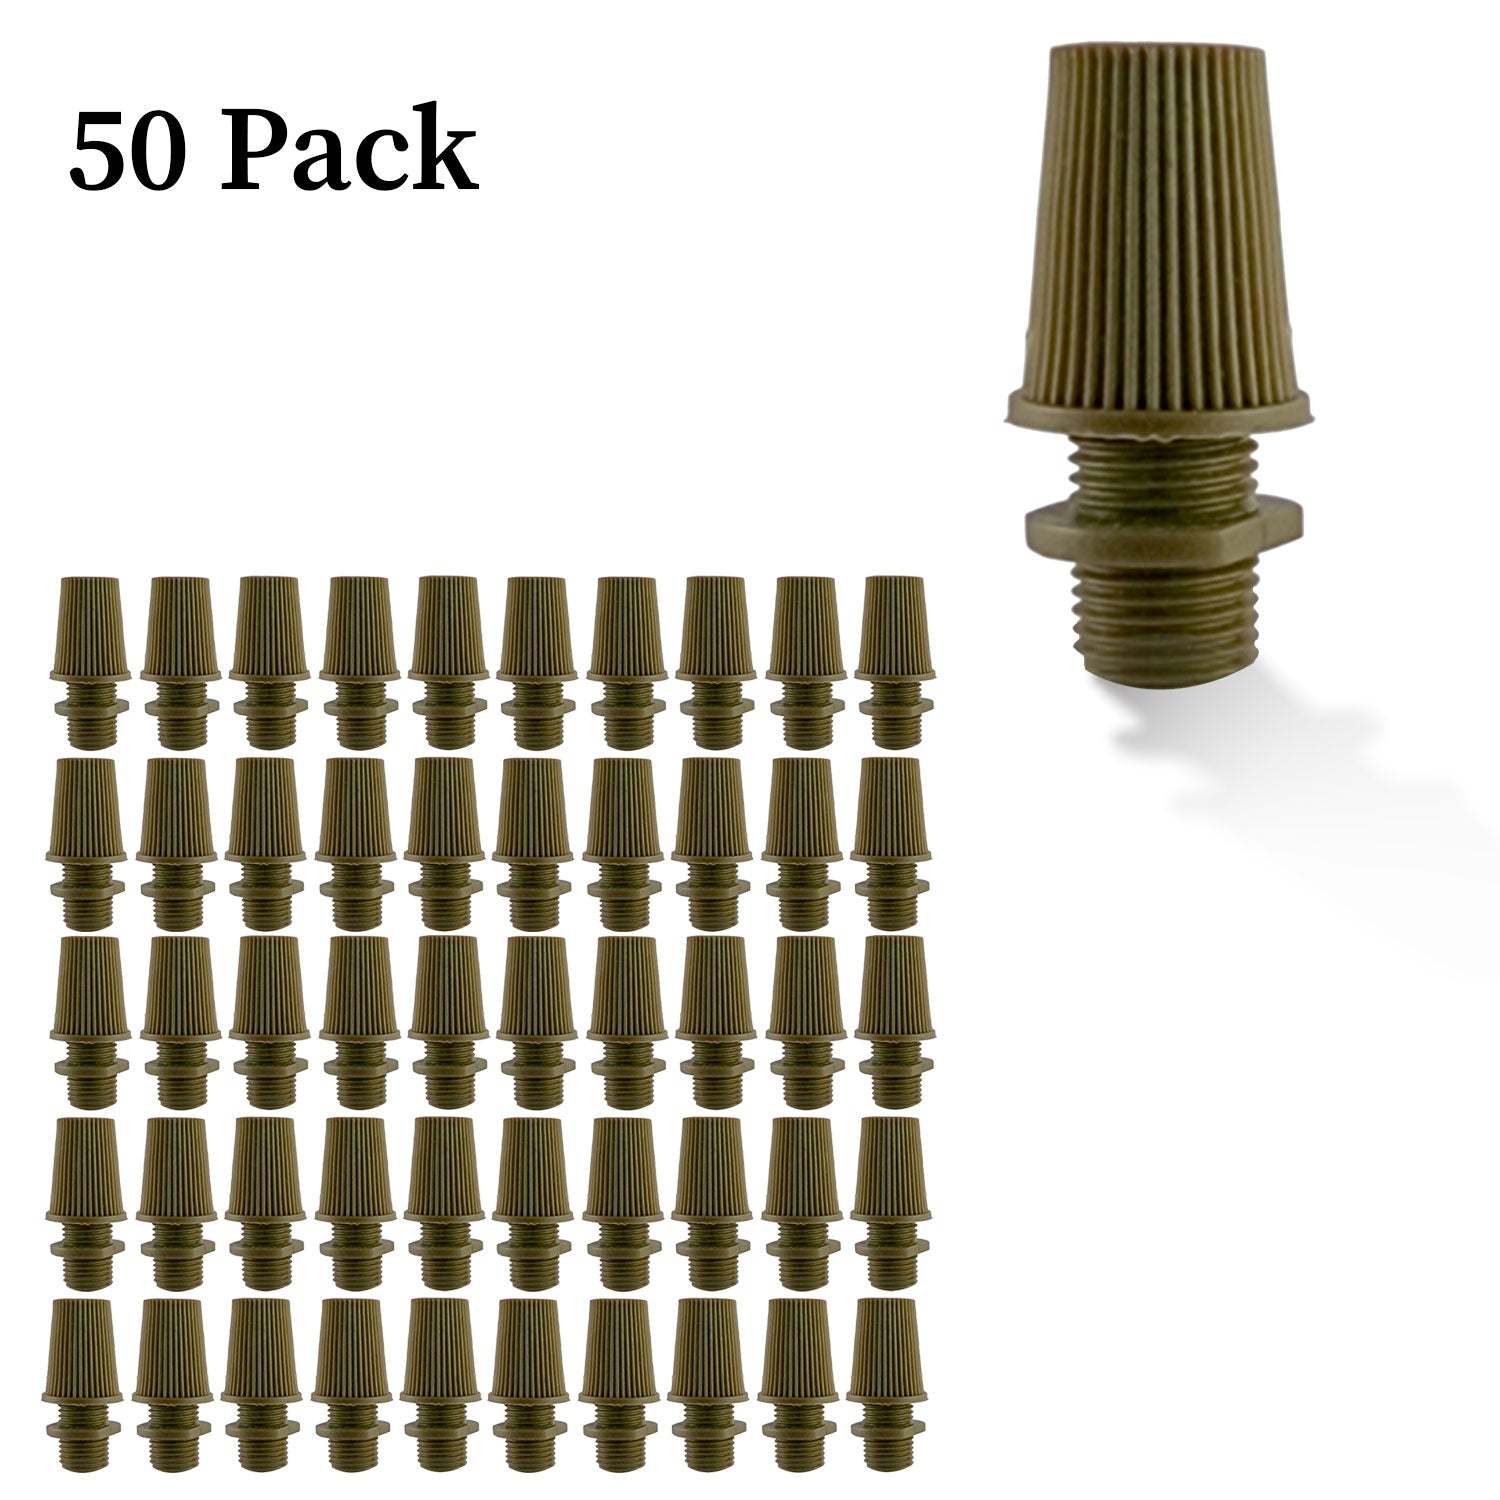 50 pack 100mm Army green cable cord grip lock